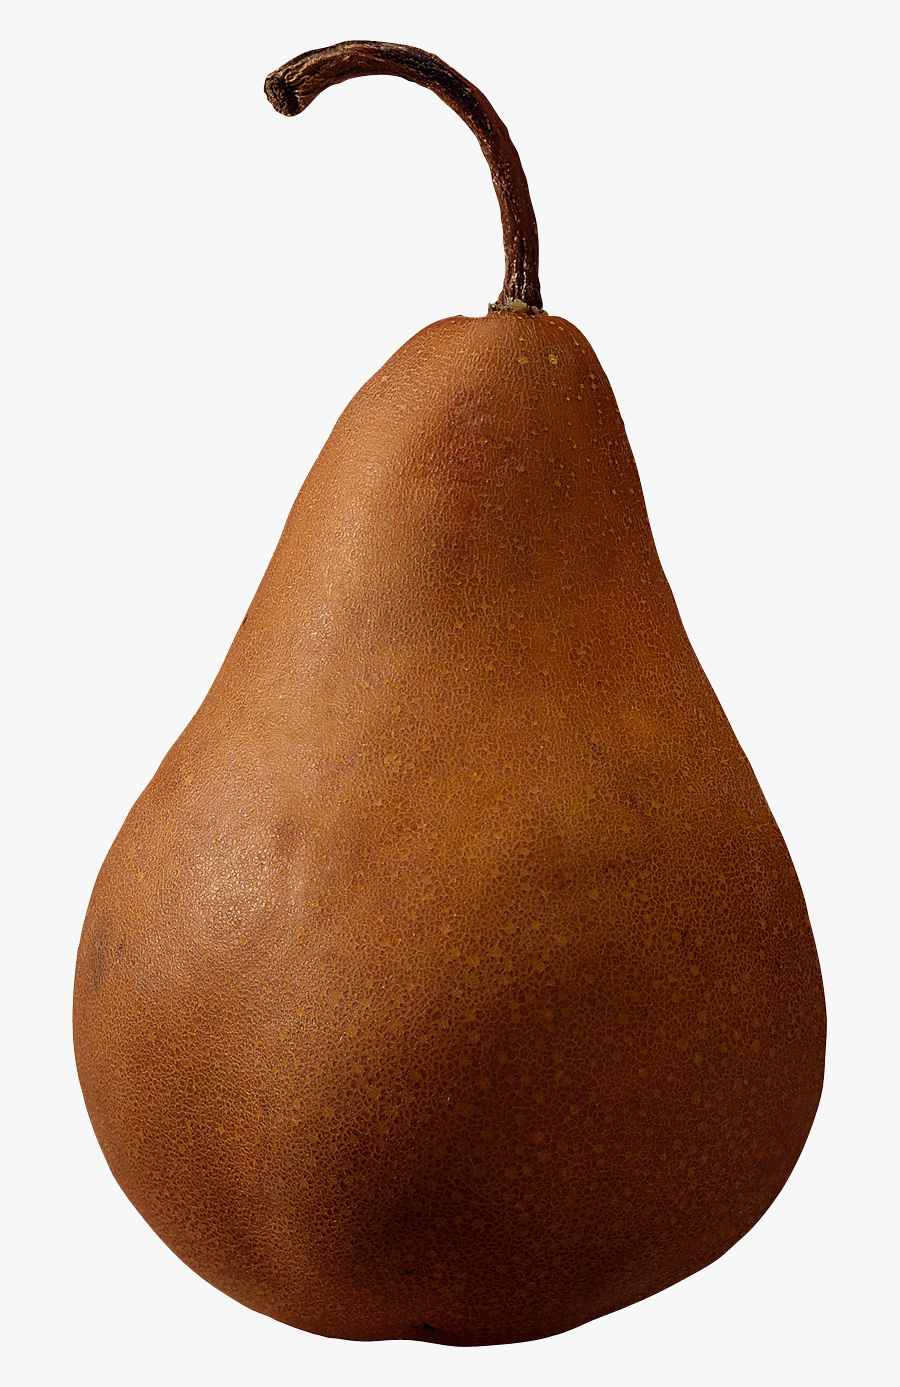 Brown Pear Png Image - Brown Pear Png, Transparent Clipart